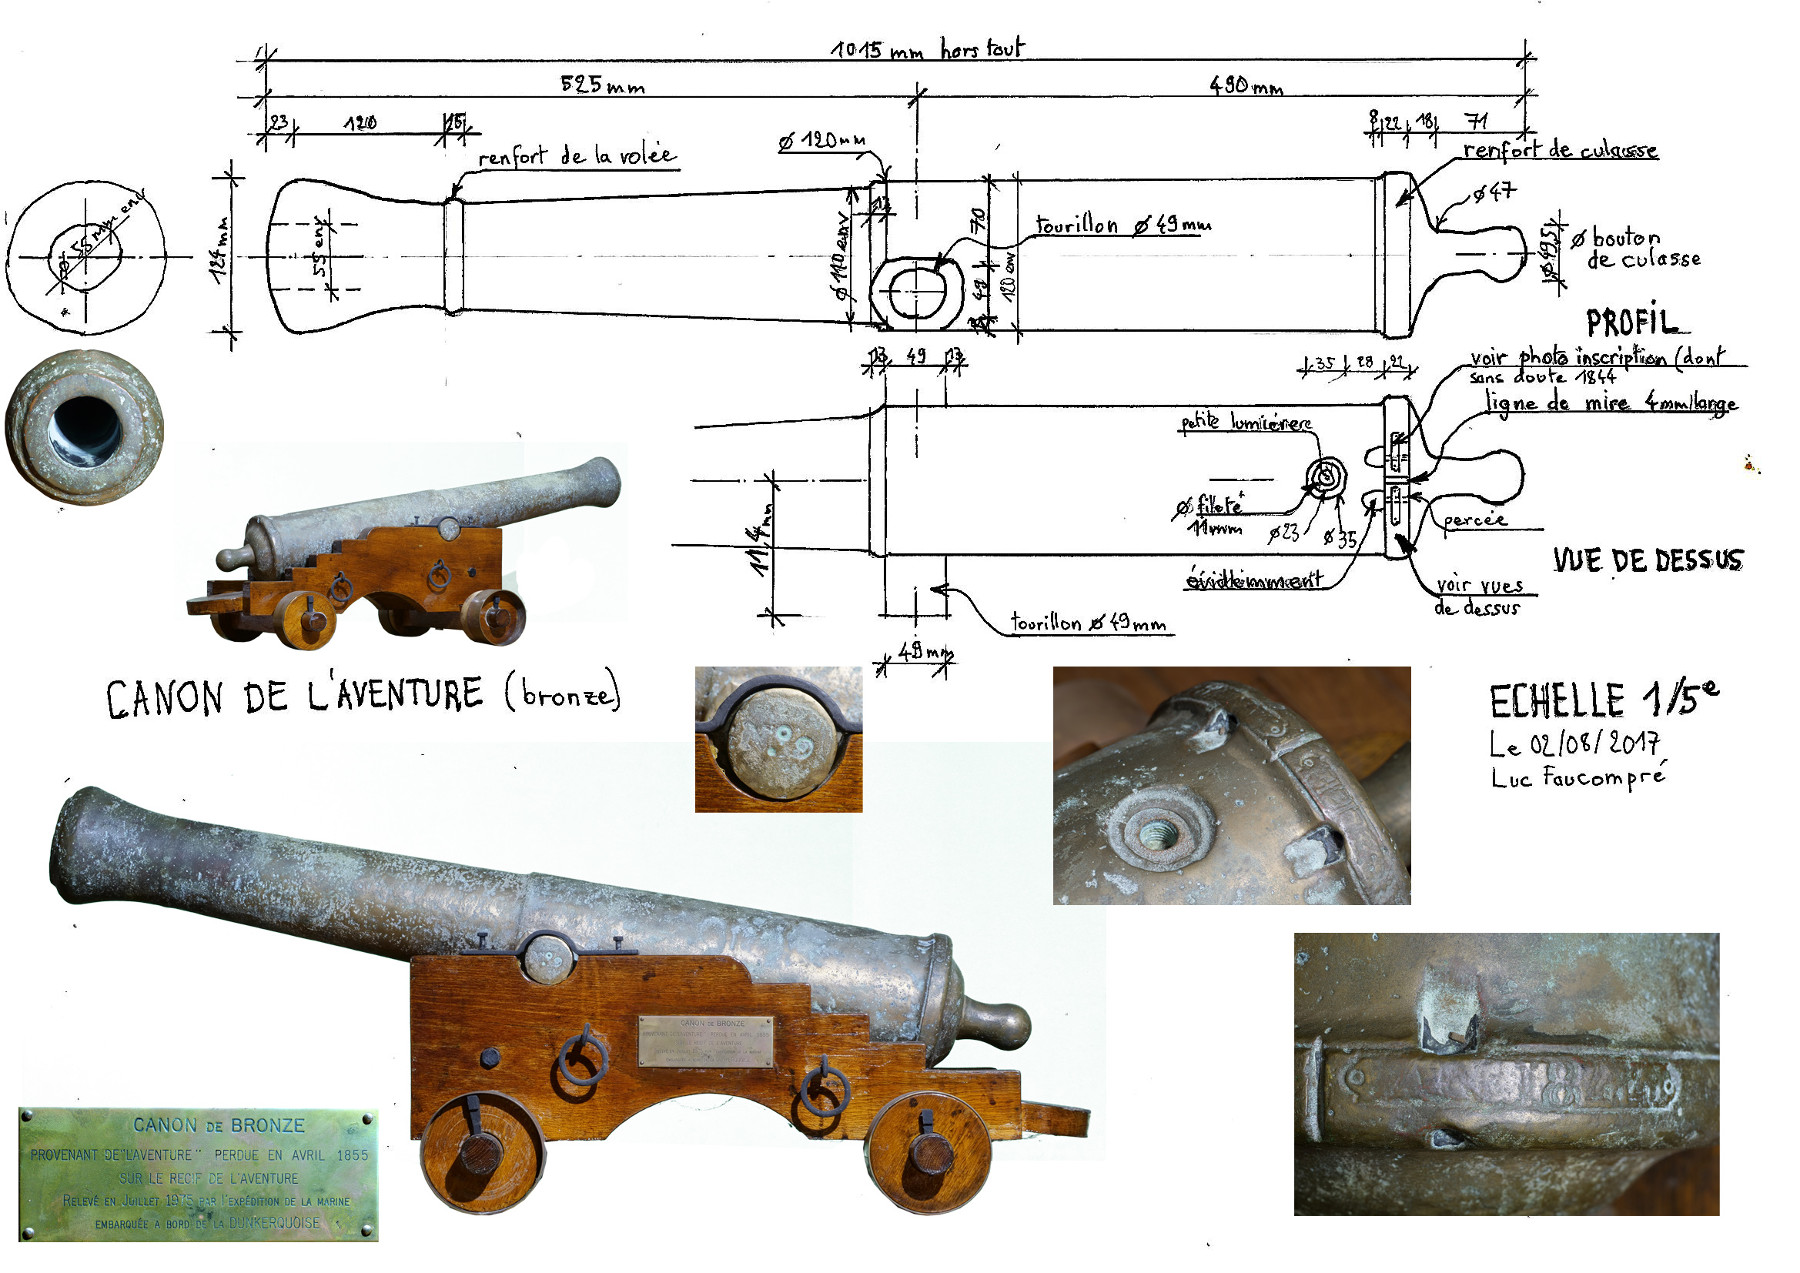 Drawing and dimensions of the canon taken by Luc Faucompré of Fortunes de Mer Calédoniennes